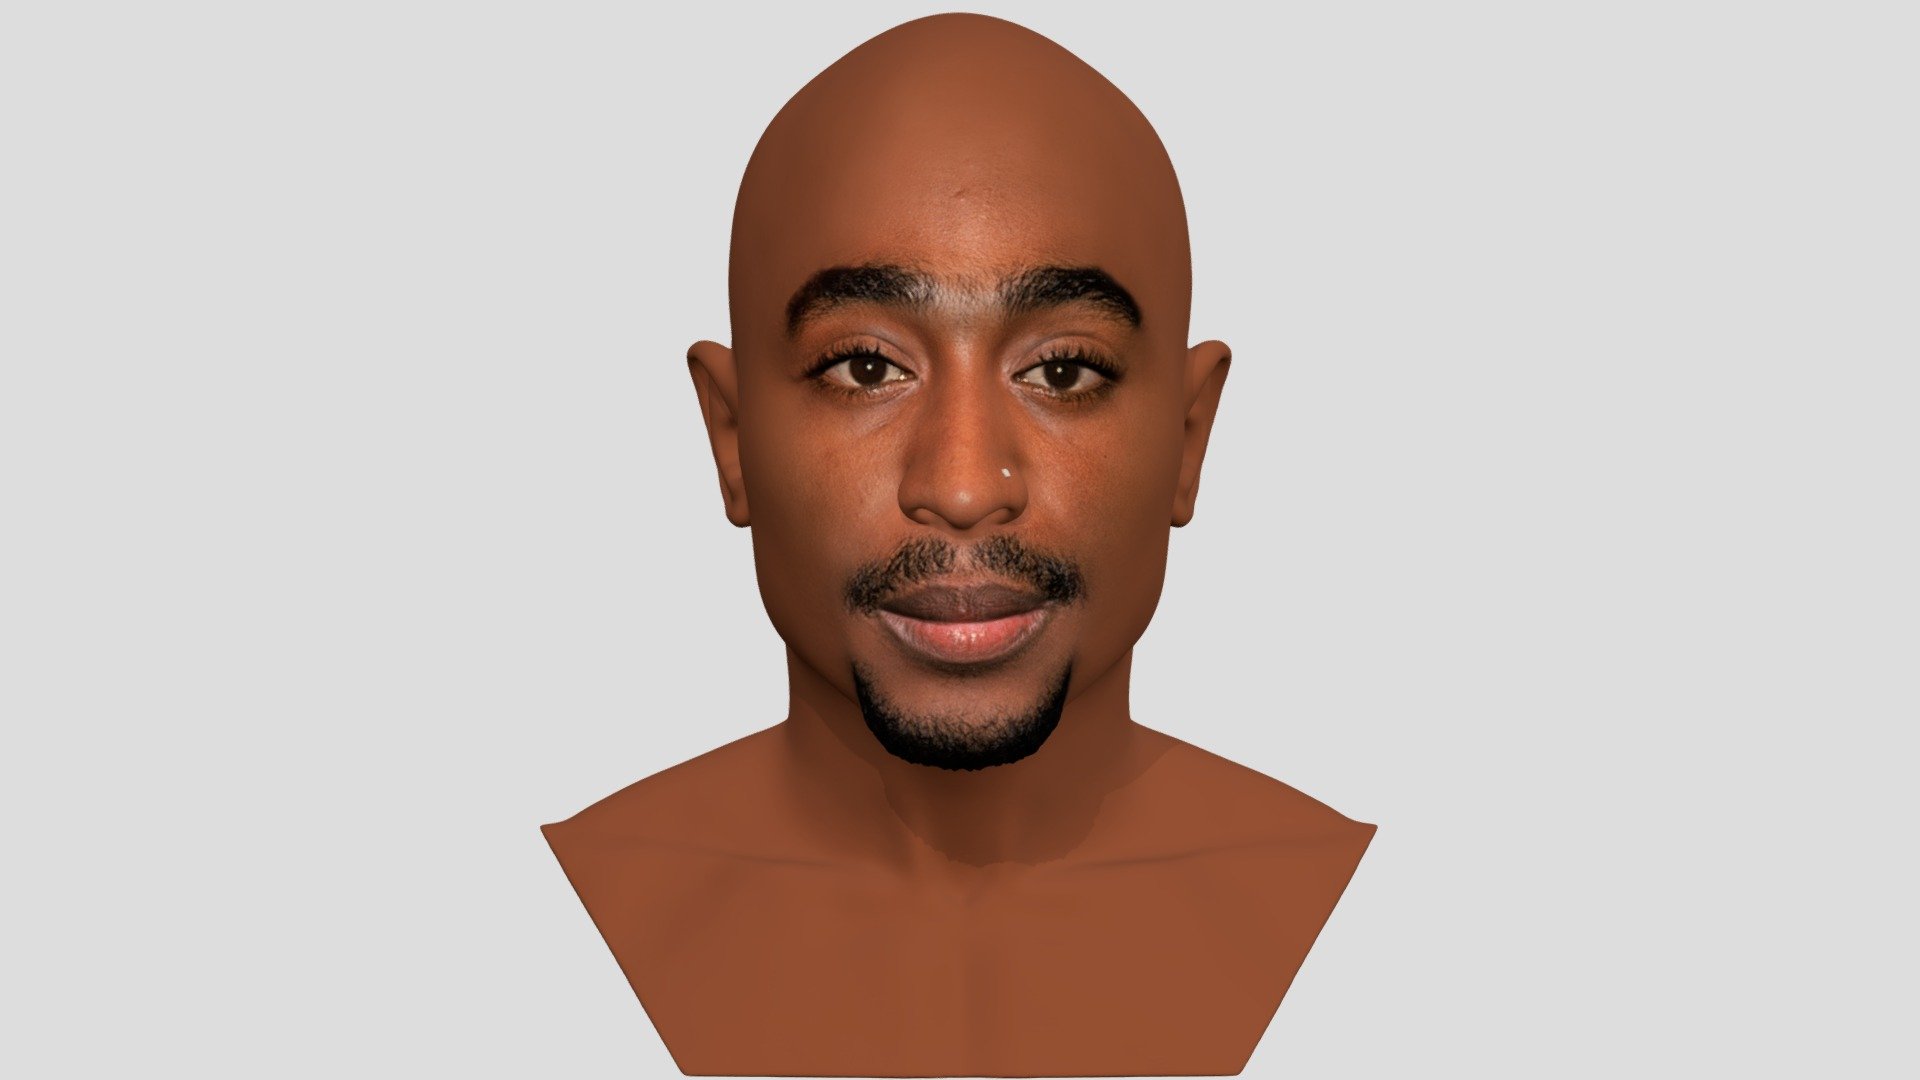 Here is Tupac Shakur bust 3D model ready for full color 3D printing. The model current size is 5 cm height, but you are free to scale it. Zip file contains obj with texture in png. The model was created in ZBrush, Mudbox and Photoshop.

If you have any questions please don’t hesitate to contact me. I will respond you ASAP. I encourage you to check my other celebrity 3D models 3d model